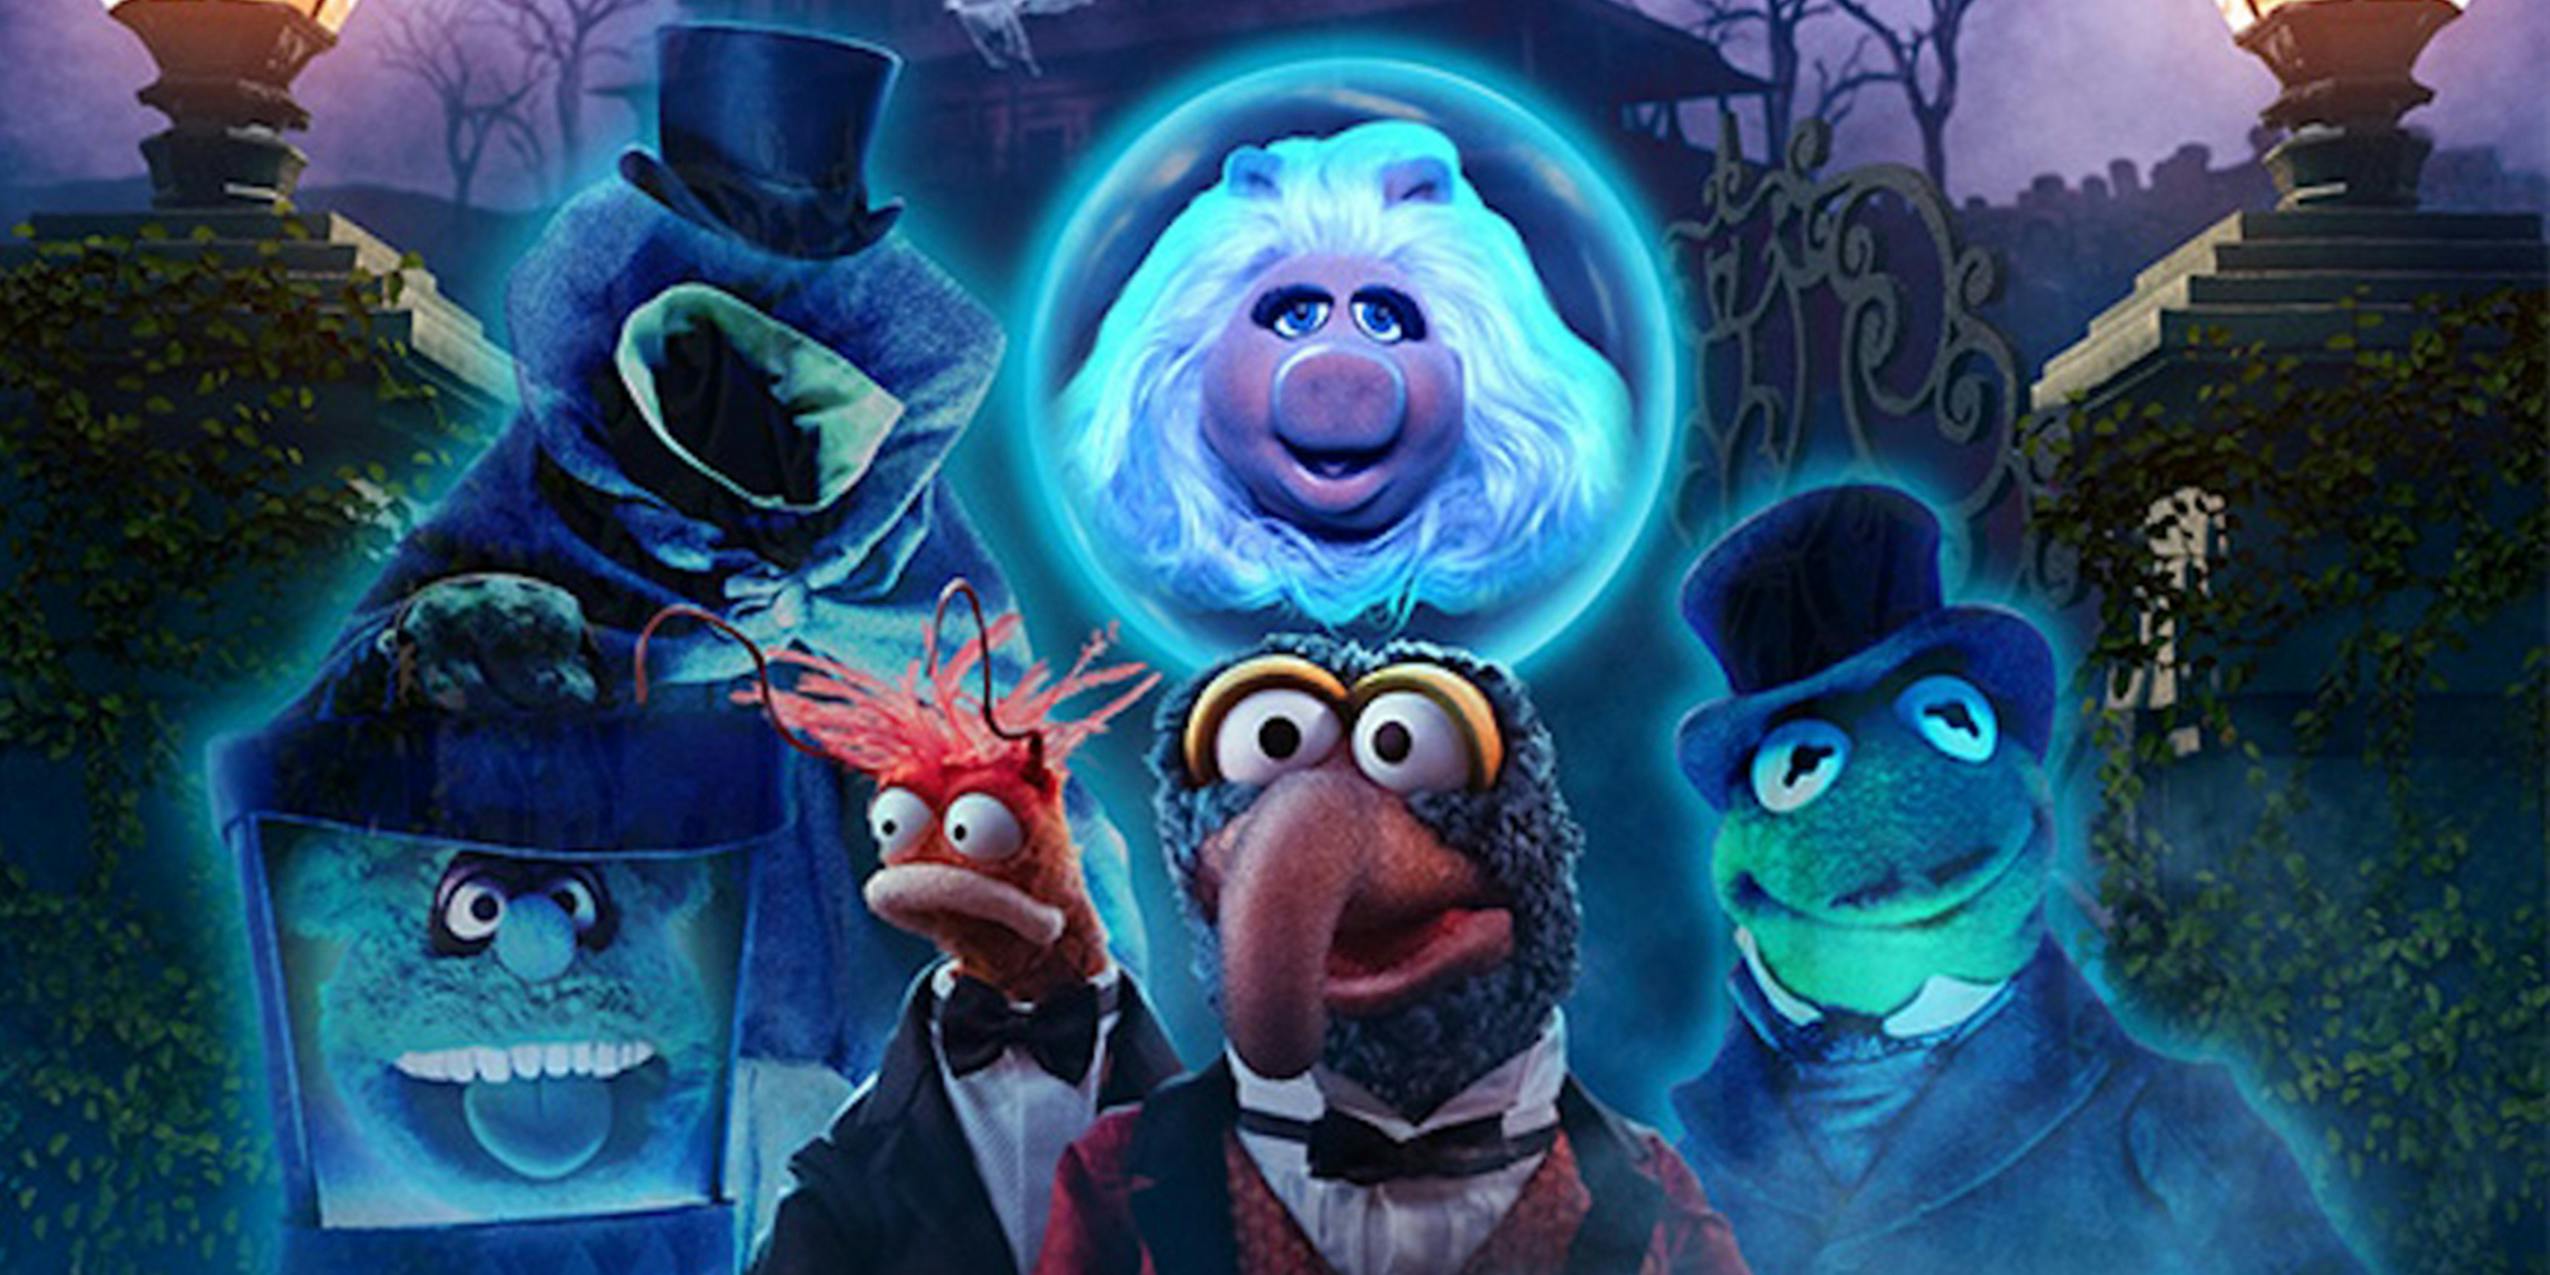 Watch 'Muppets Haunted Mansion' How to Stream Online